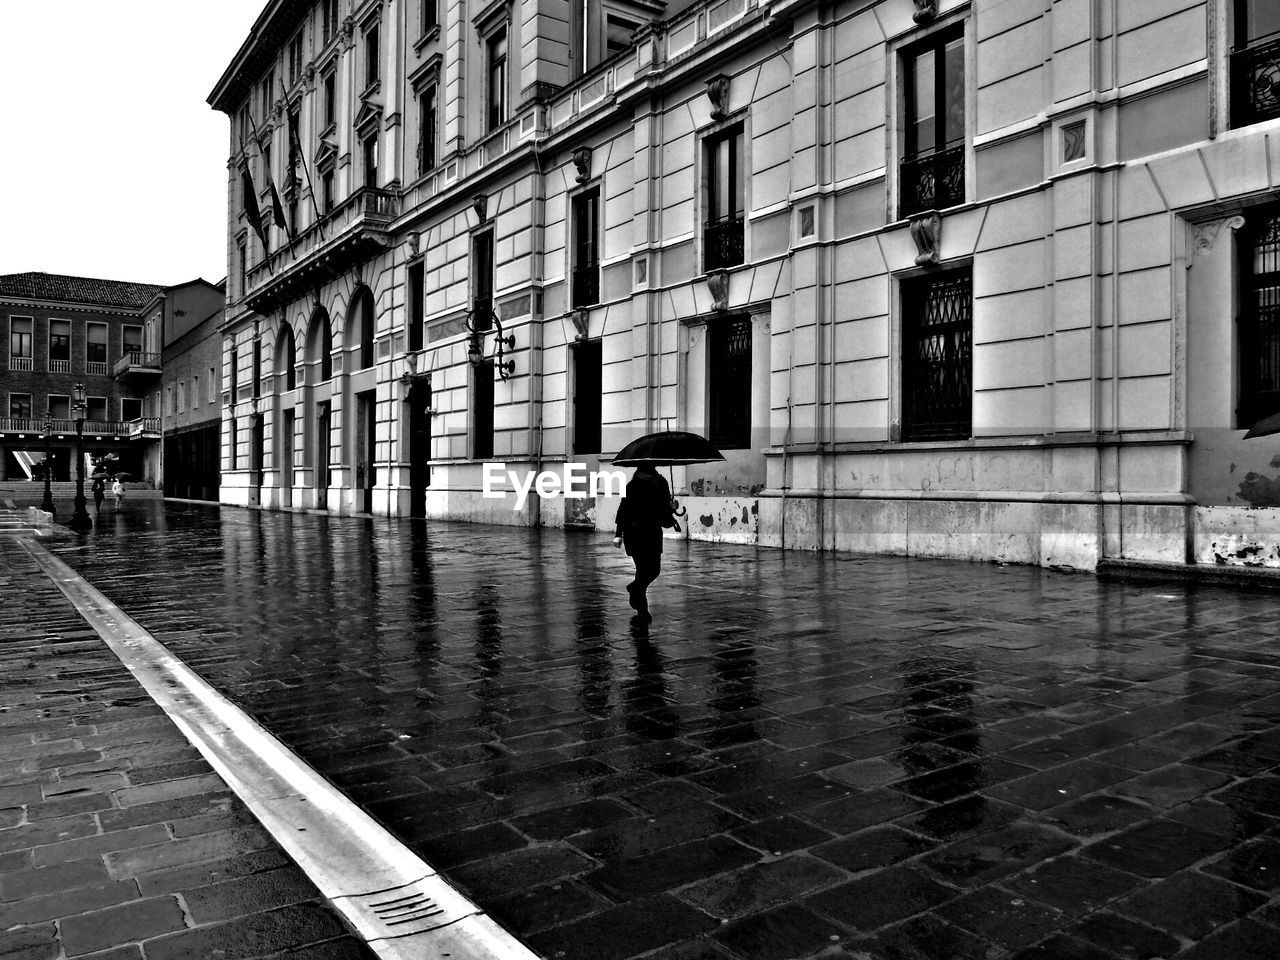 Person with umbrella walking on wet street by building